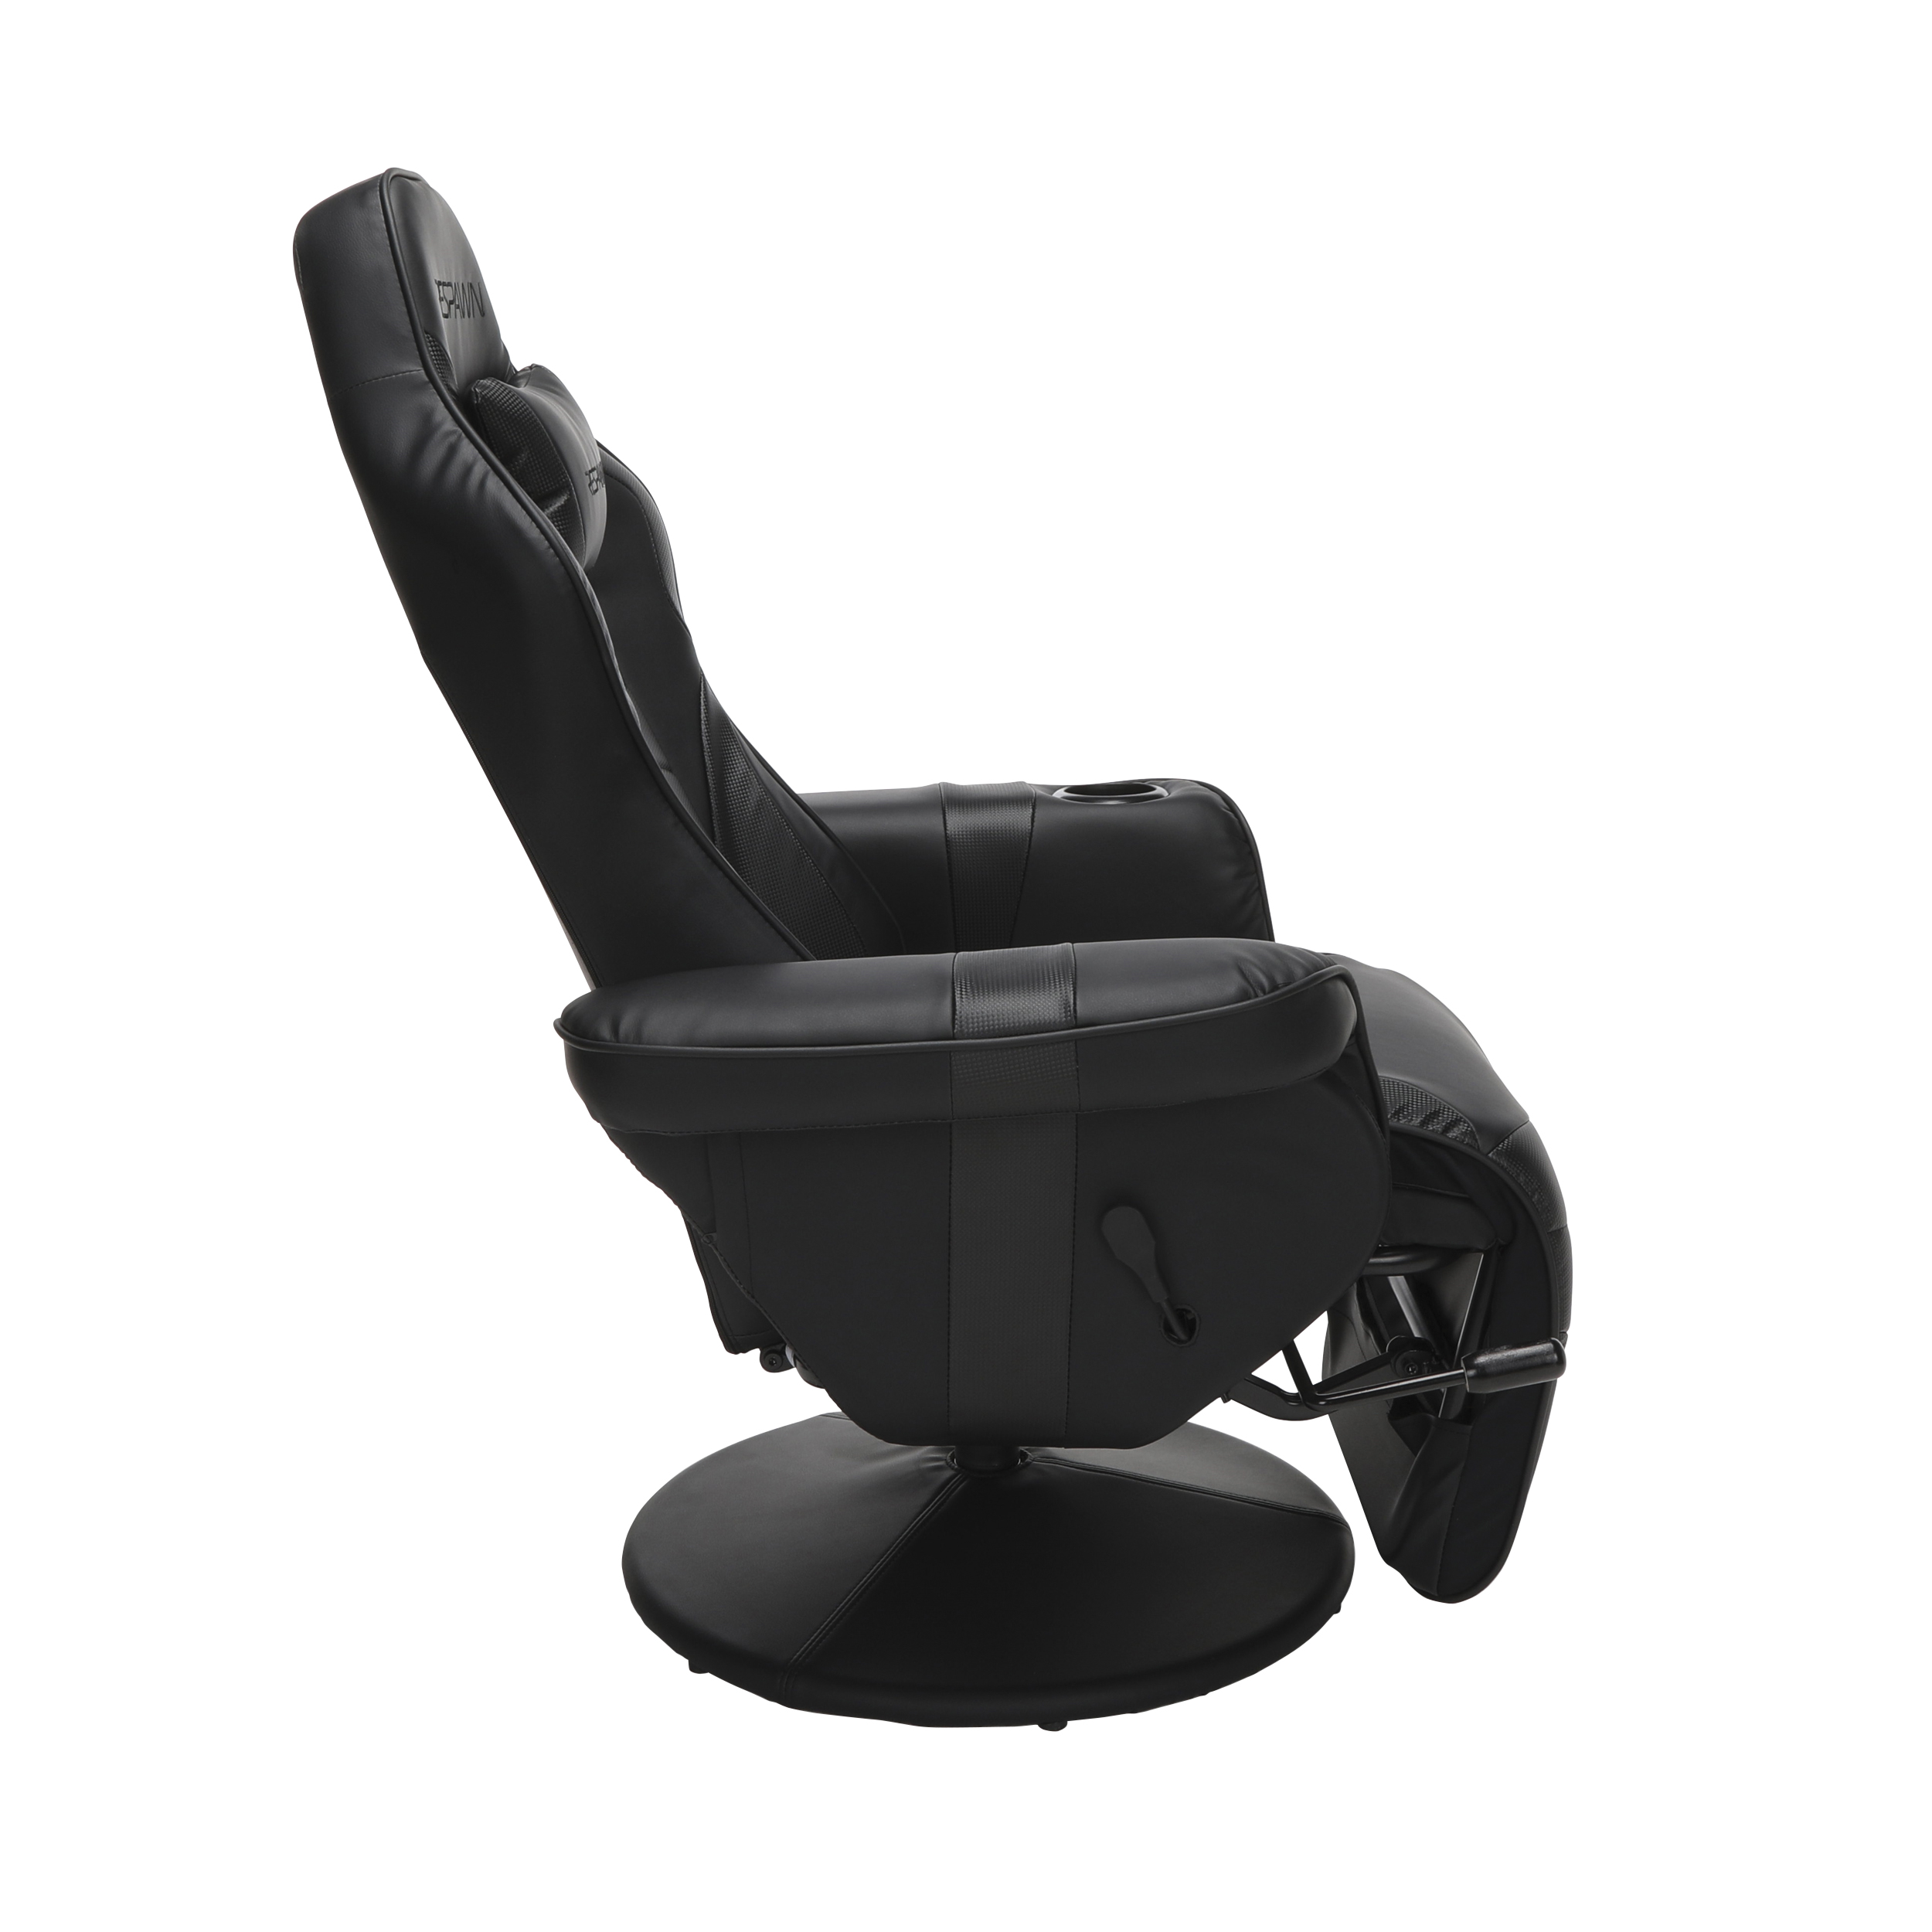 RESPAWN 900 Gaming Recliner - Video Games Console Recliner Chair, Computer Recliner, Adjustable Leg Rest and Recline, Recliner with Cupholder, Reclining Gaming Chair with Footrest - Black - image 4 of 10